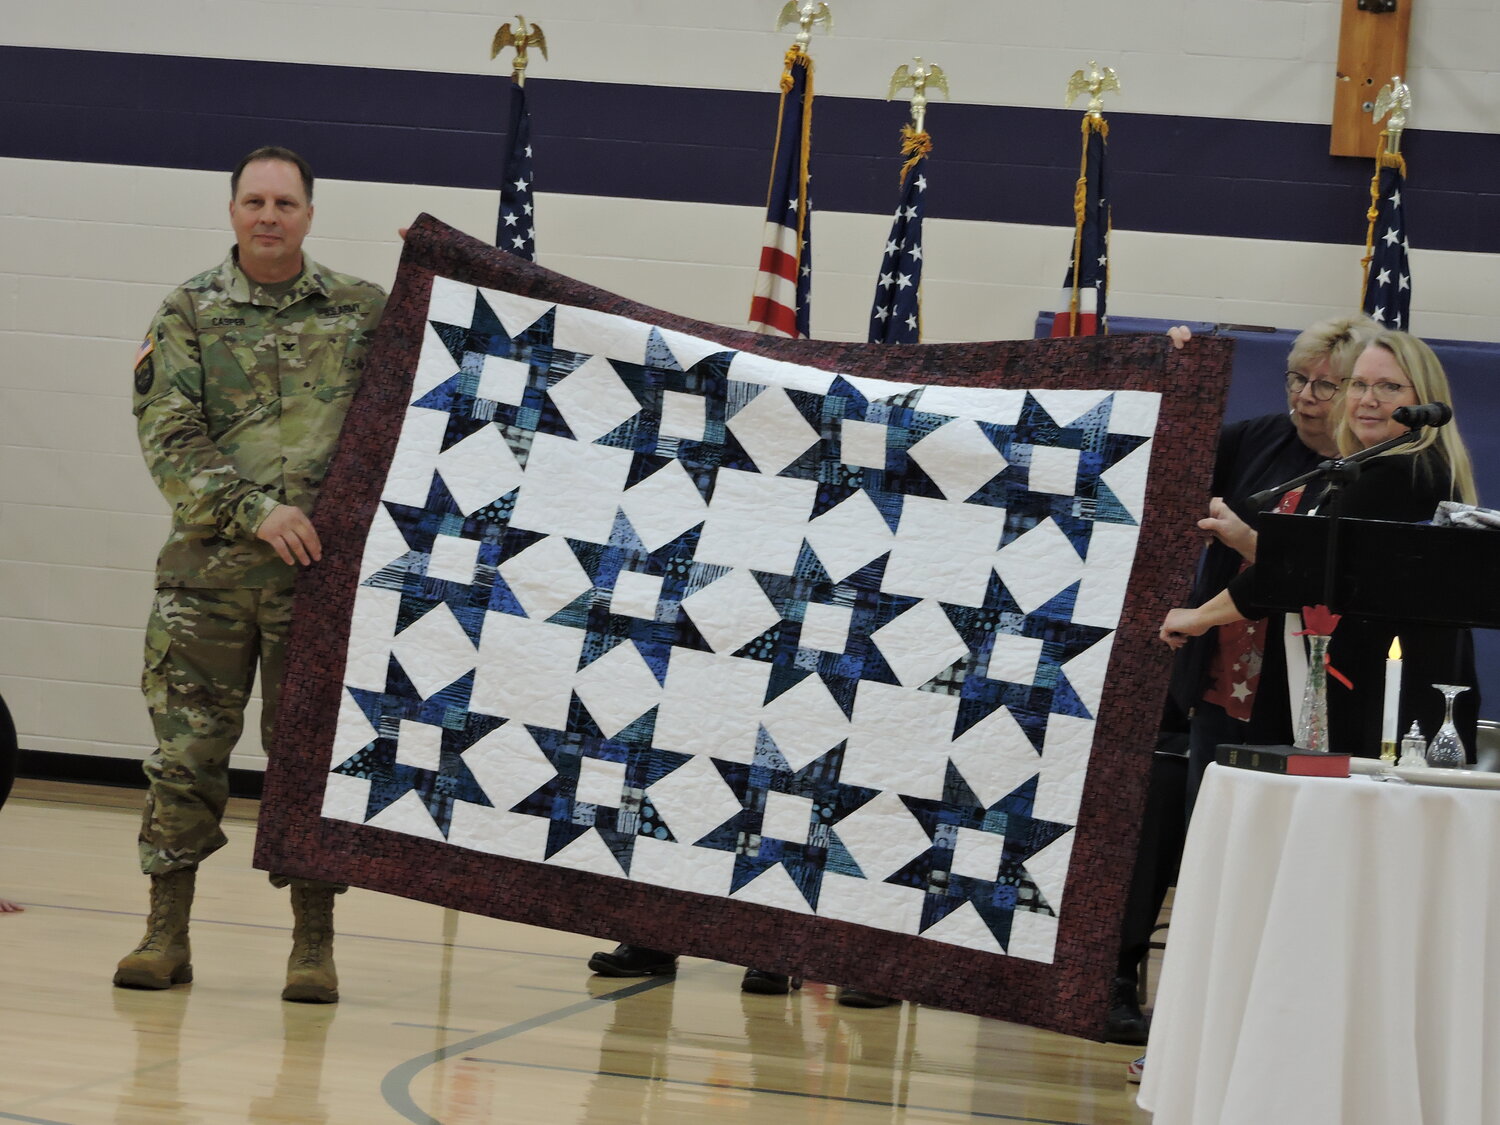 Lt. Col. Ryan Casper, a retired Ellsworth High School social studies teacher with 40 years of military service, receives the Quilt of Valor from Kathy Krug and Laura Cutsforth.